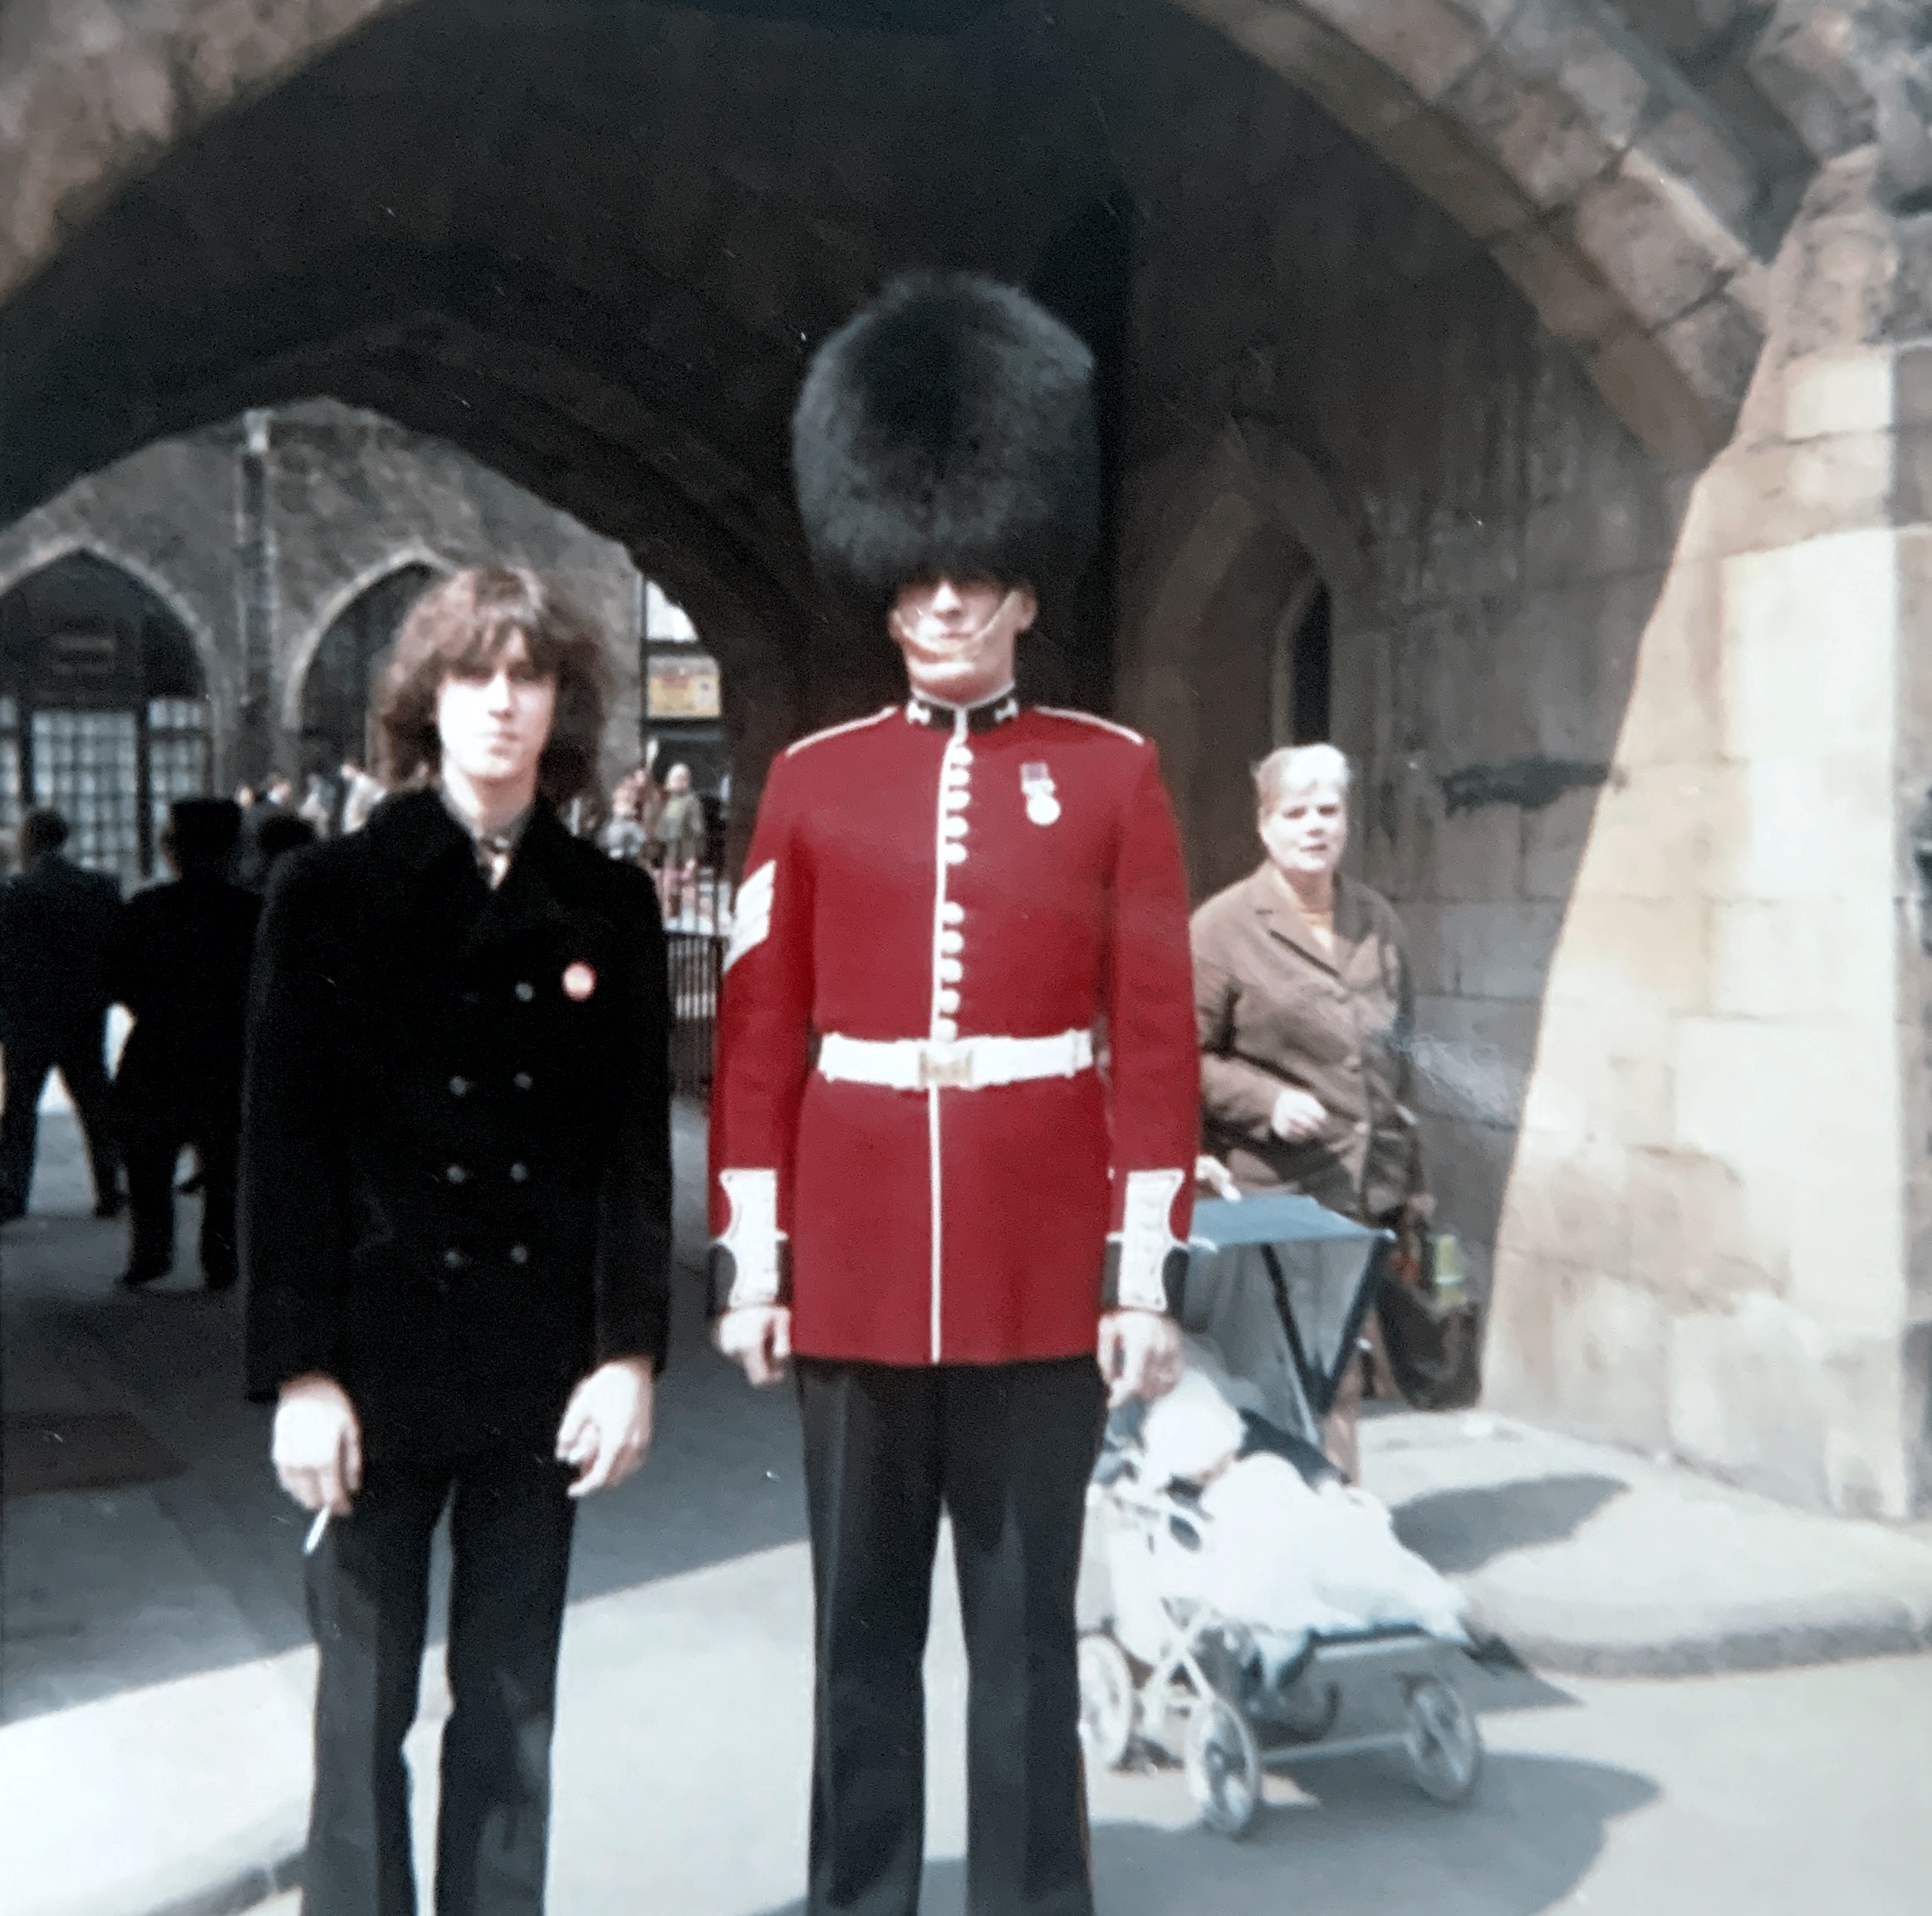 Tom Hartman of The Aerovons standing with a beefeater in London England 19)9 